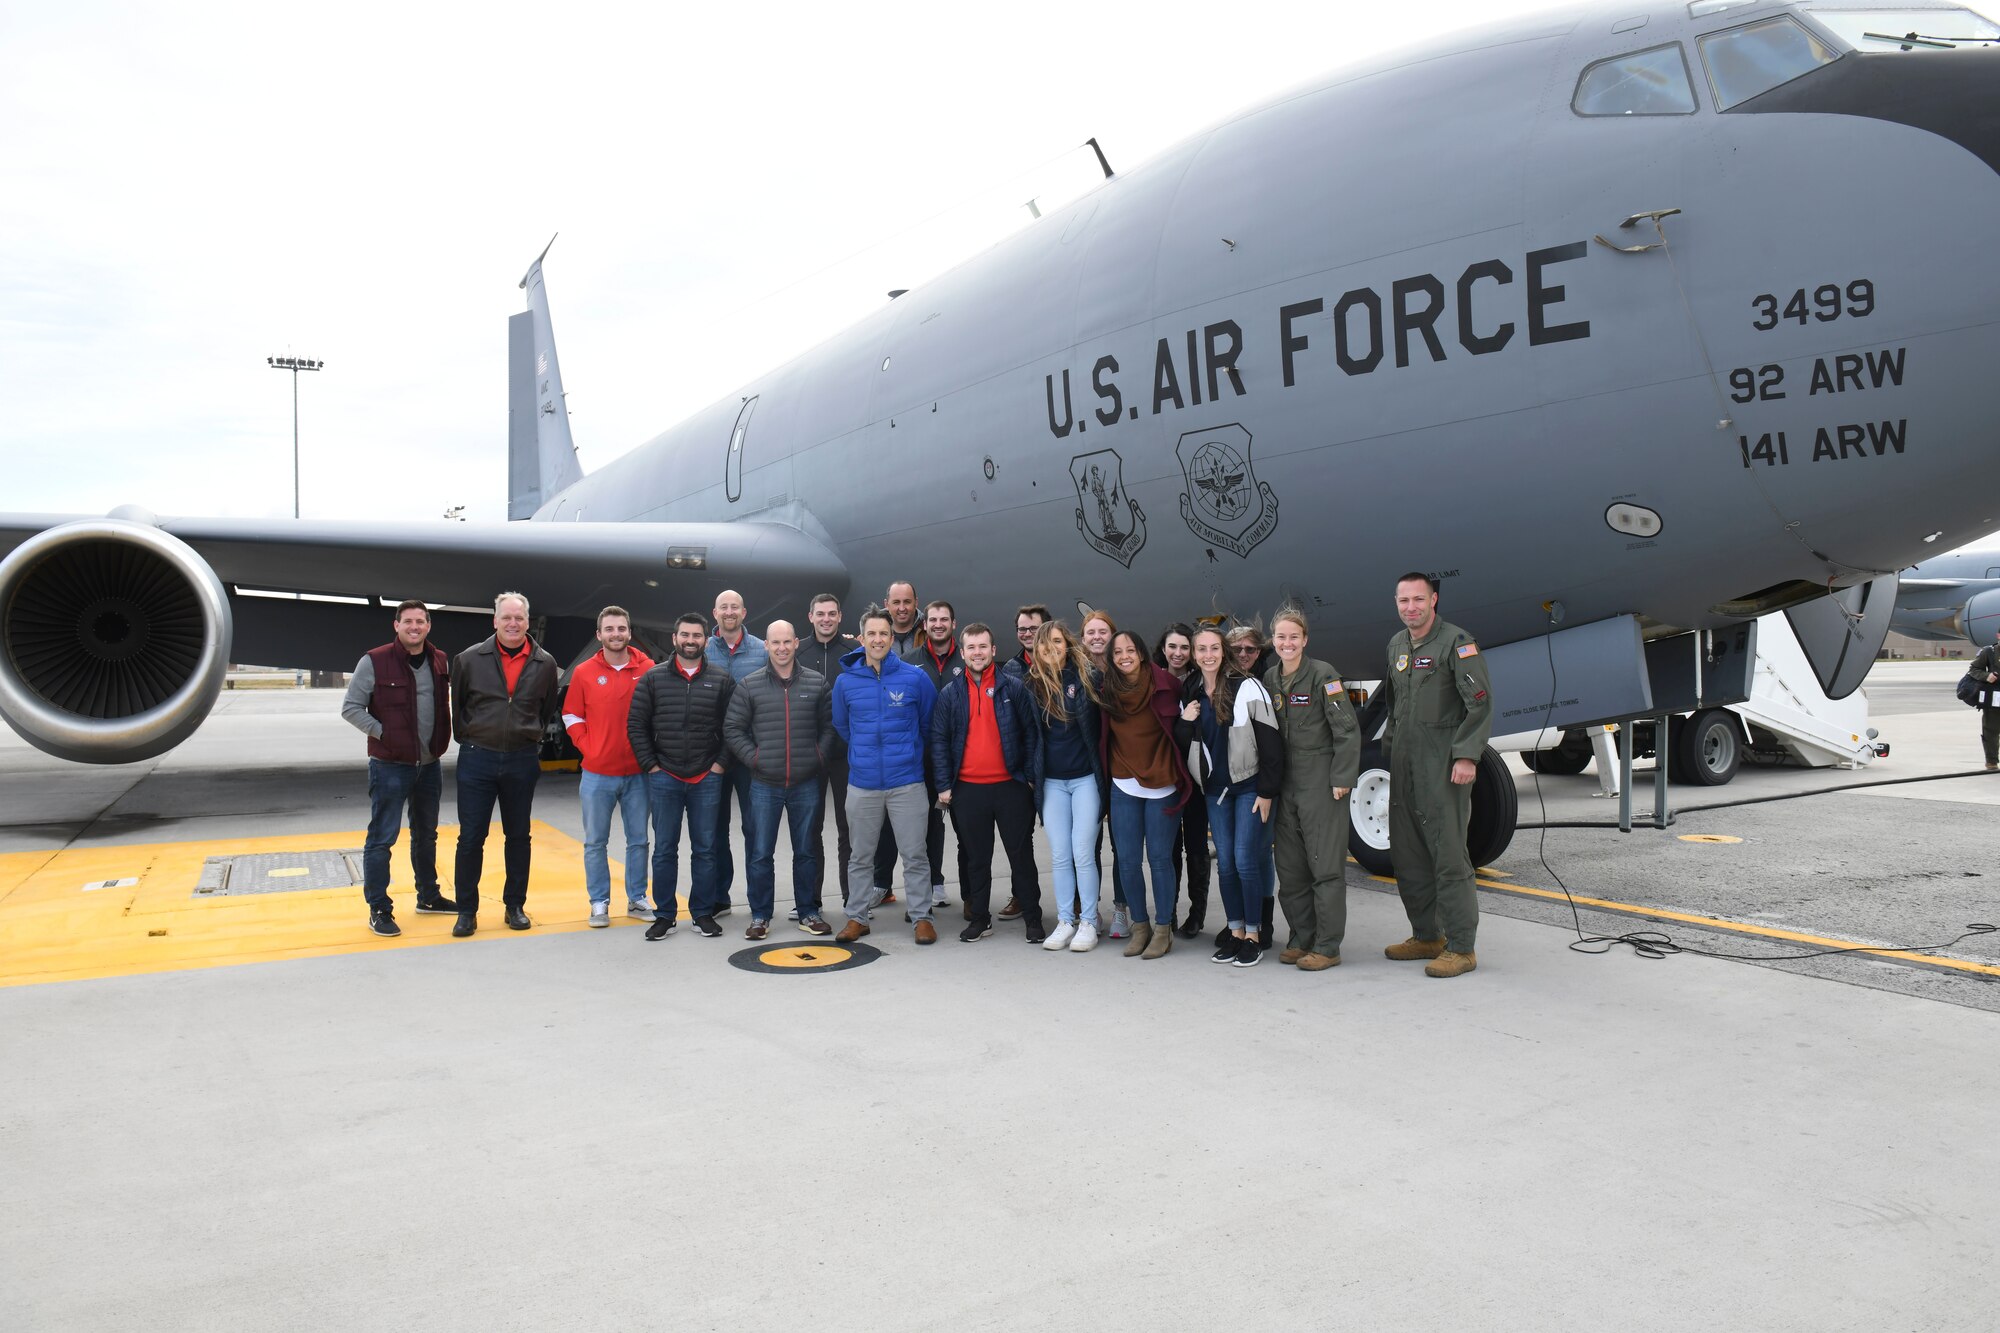 The Spokane Indians minor league baseball team administration and 92nd Air Refueling Squadron pilots pose in front of a KC-135 Stratotanker at Fairchild Air Force Base, Washington, Oct. 27, 2021. The Spokane Indians leadership team flew with the 92nd ARS crew as part of Operation Fly Together, a joint partnership that was built between Fairchild and the minor league team, intended to build deeper relationships with organizations throughout the community. (U.S. Air Force photo by Senior Airman Kiaundra Miller)